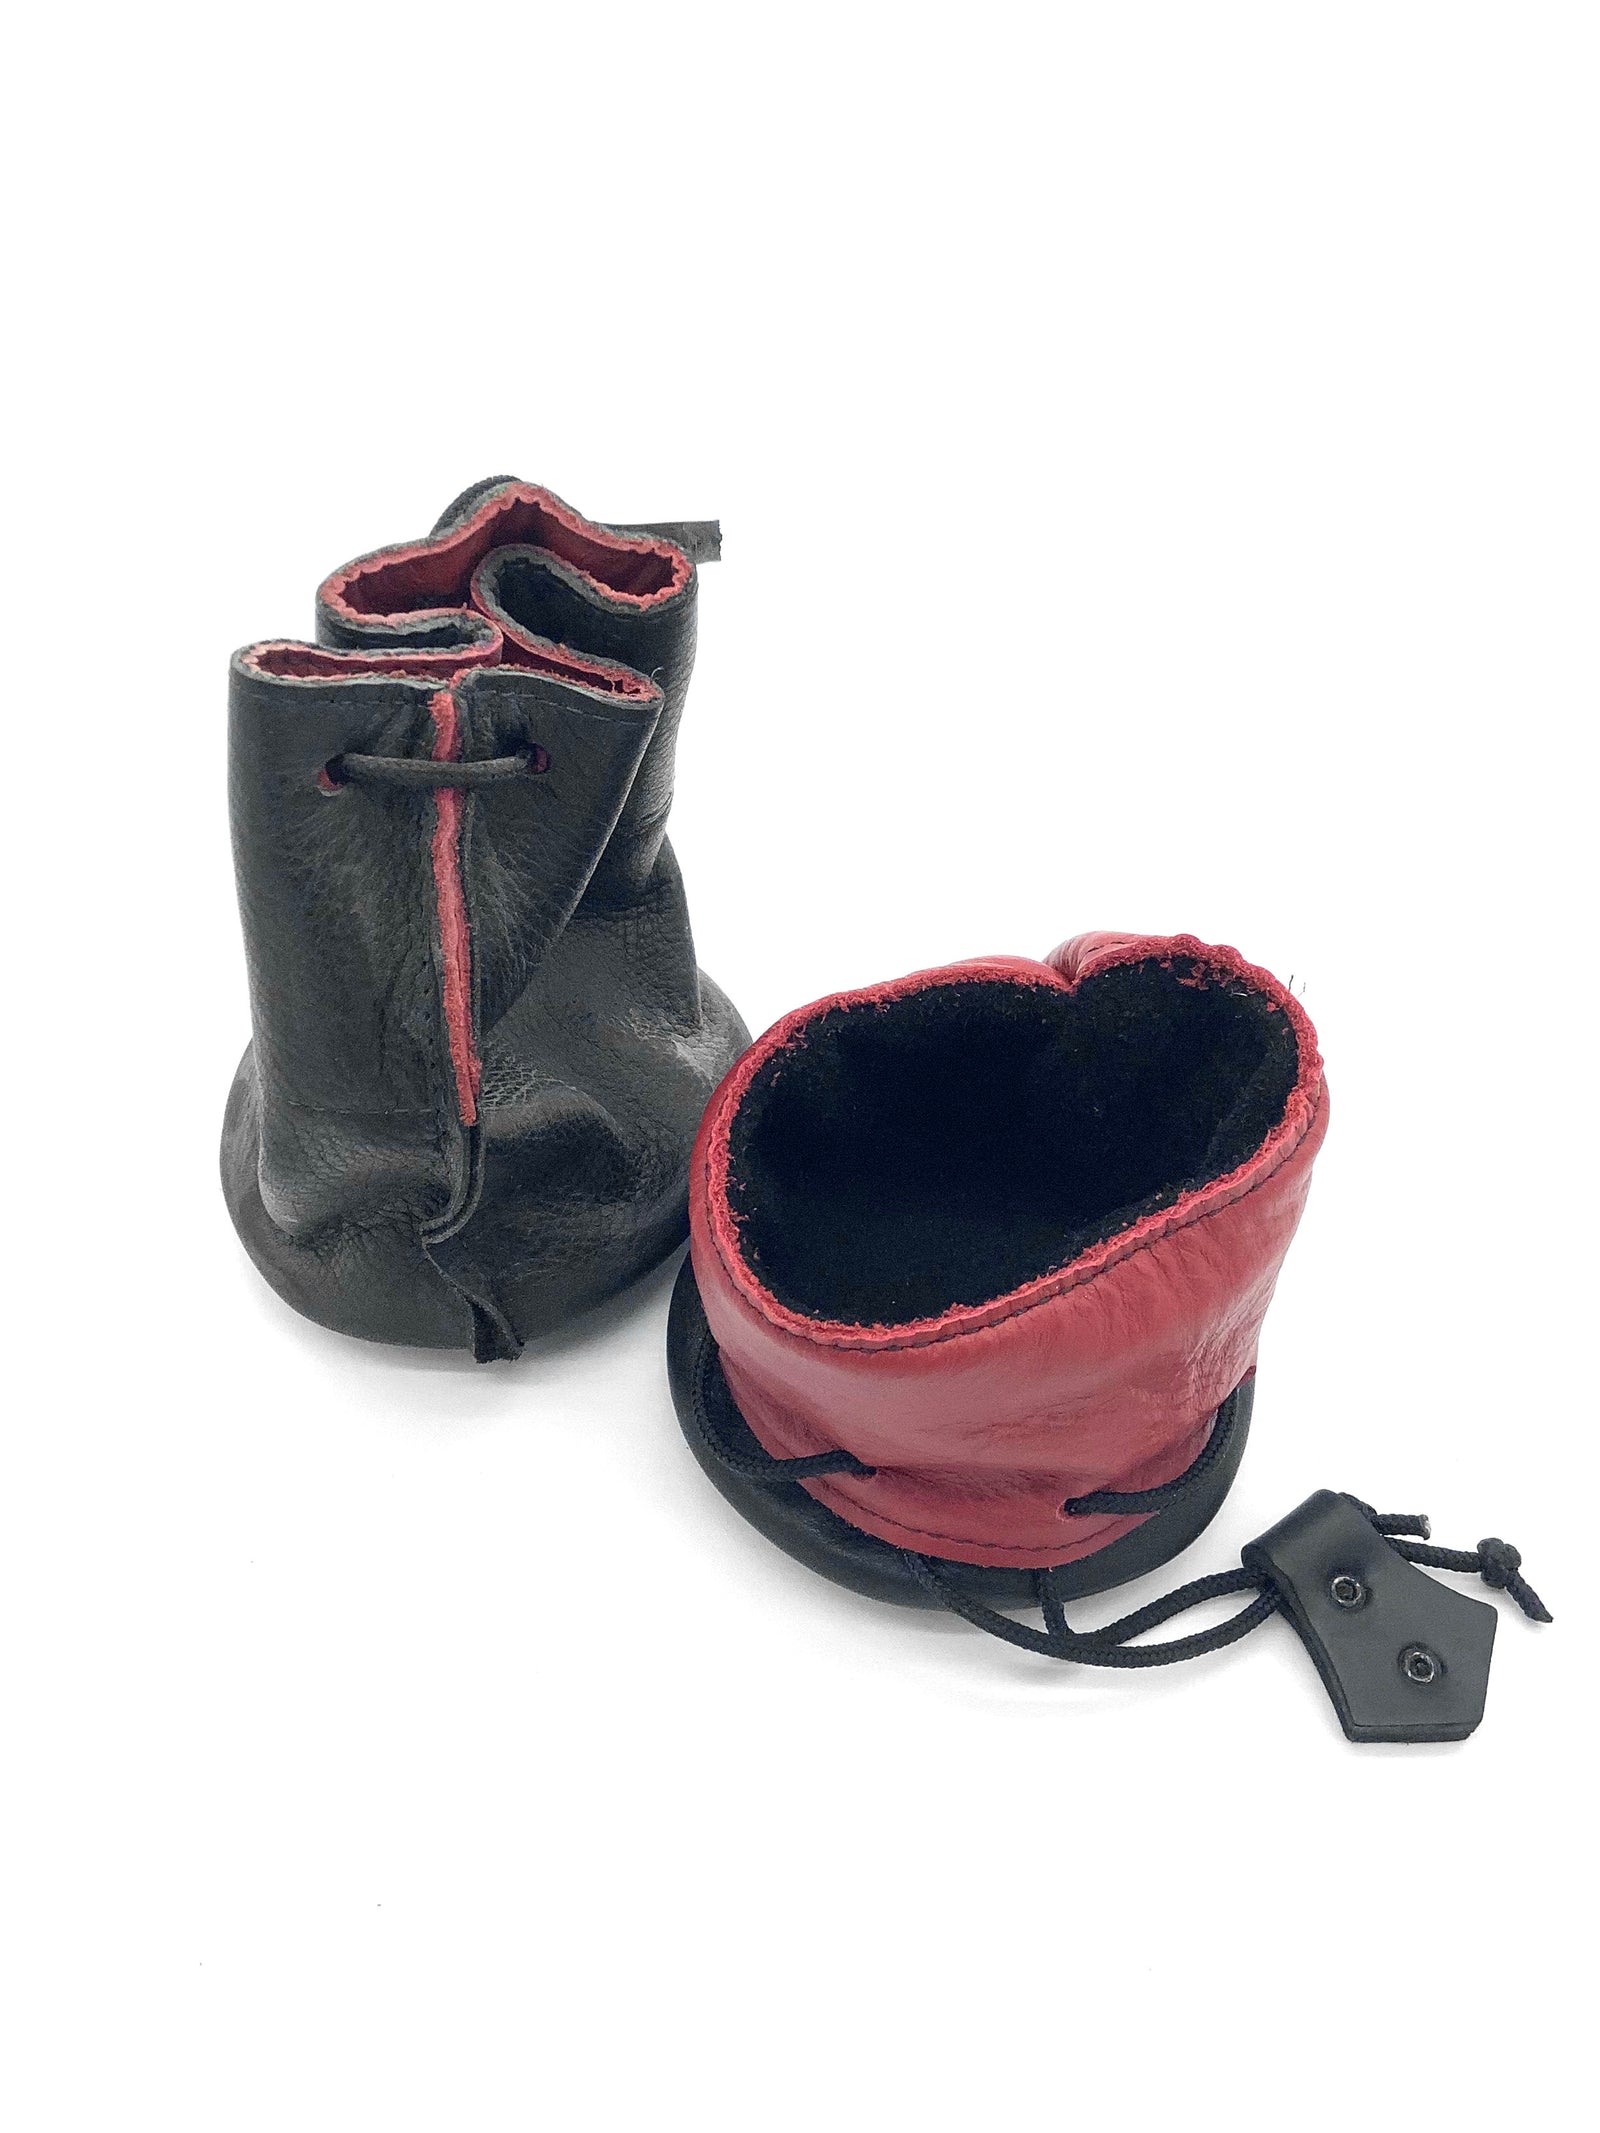 Black/Red Leather Dice Bag / Dice Cup Transformer